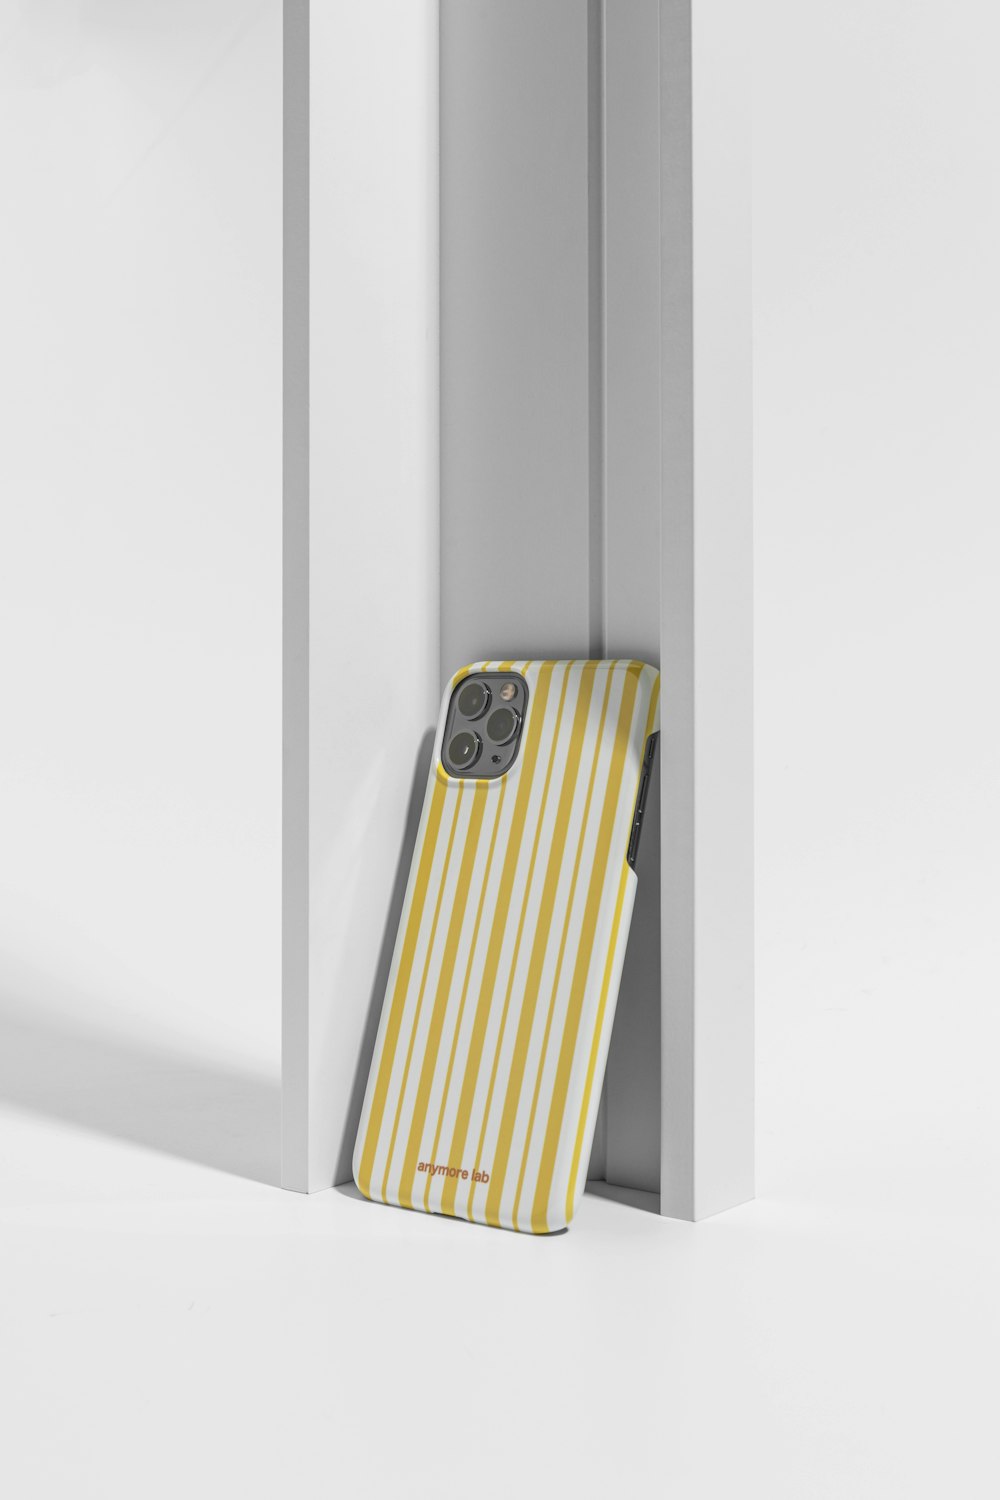 a yellow and white striped phone case in a doorway